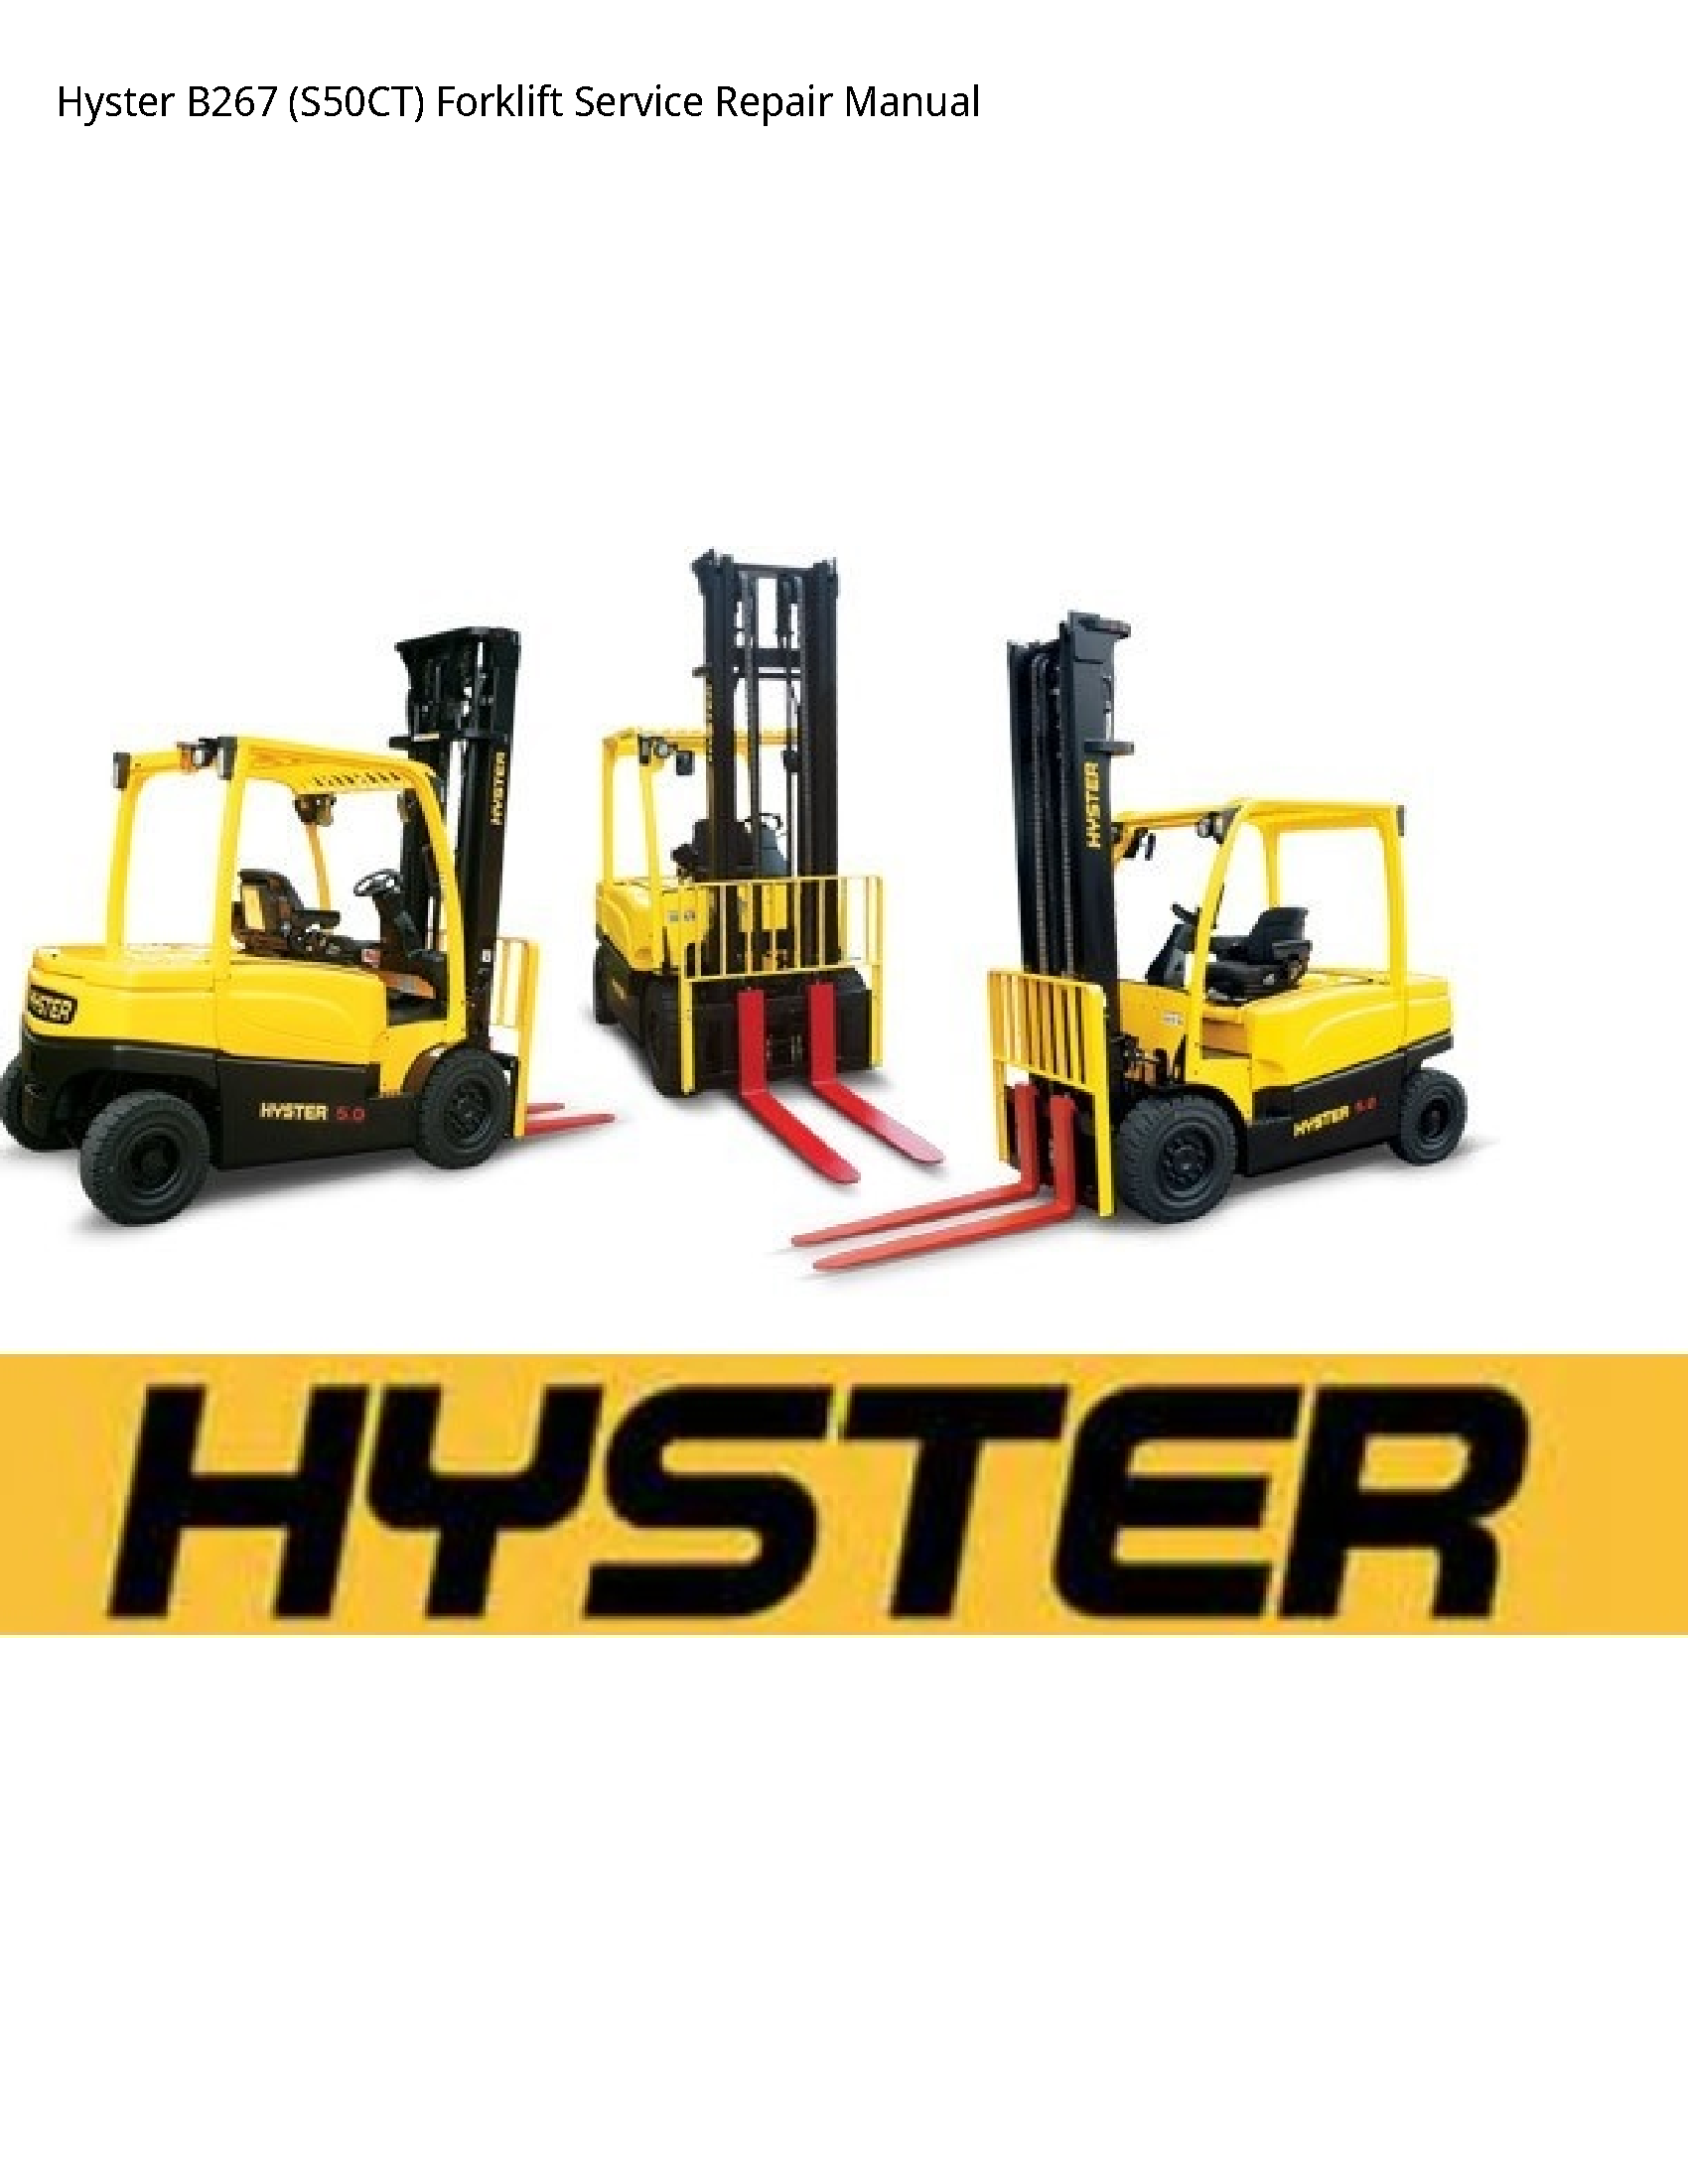 Hyster B267 Forklift manual